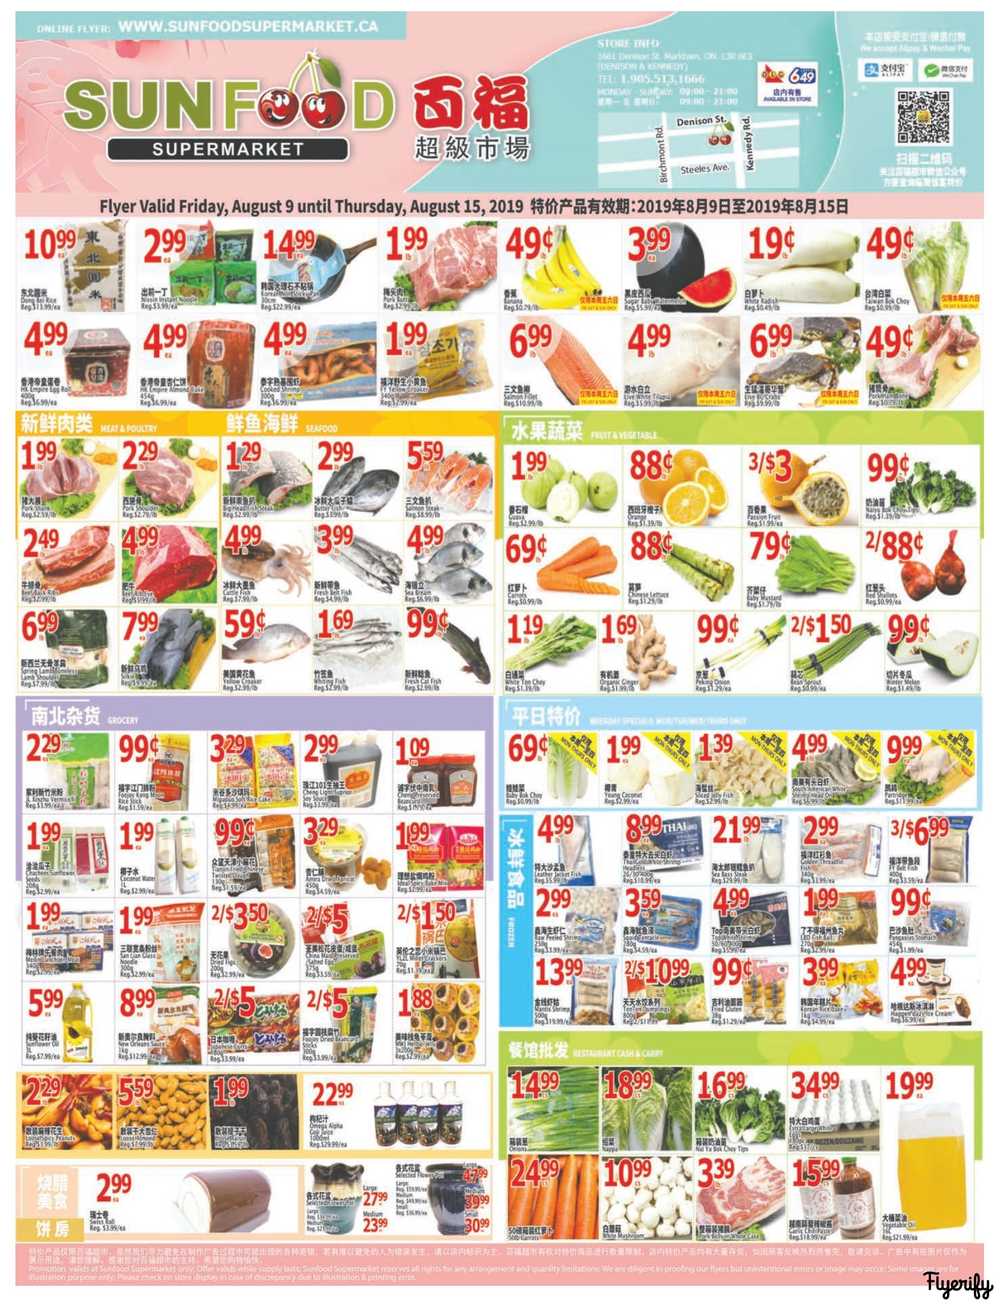 Sunfood Supermarket Flyer August 9 to 15 Canada